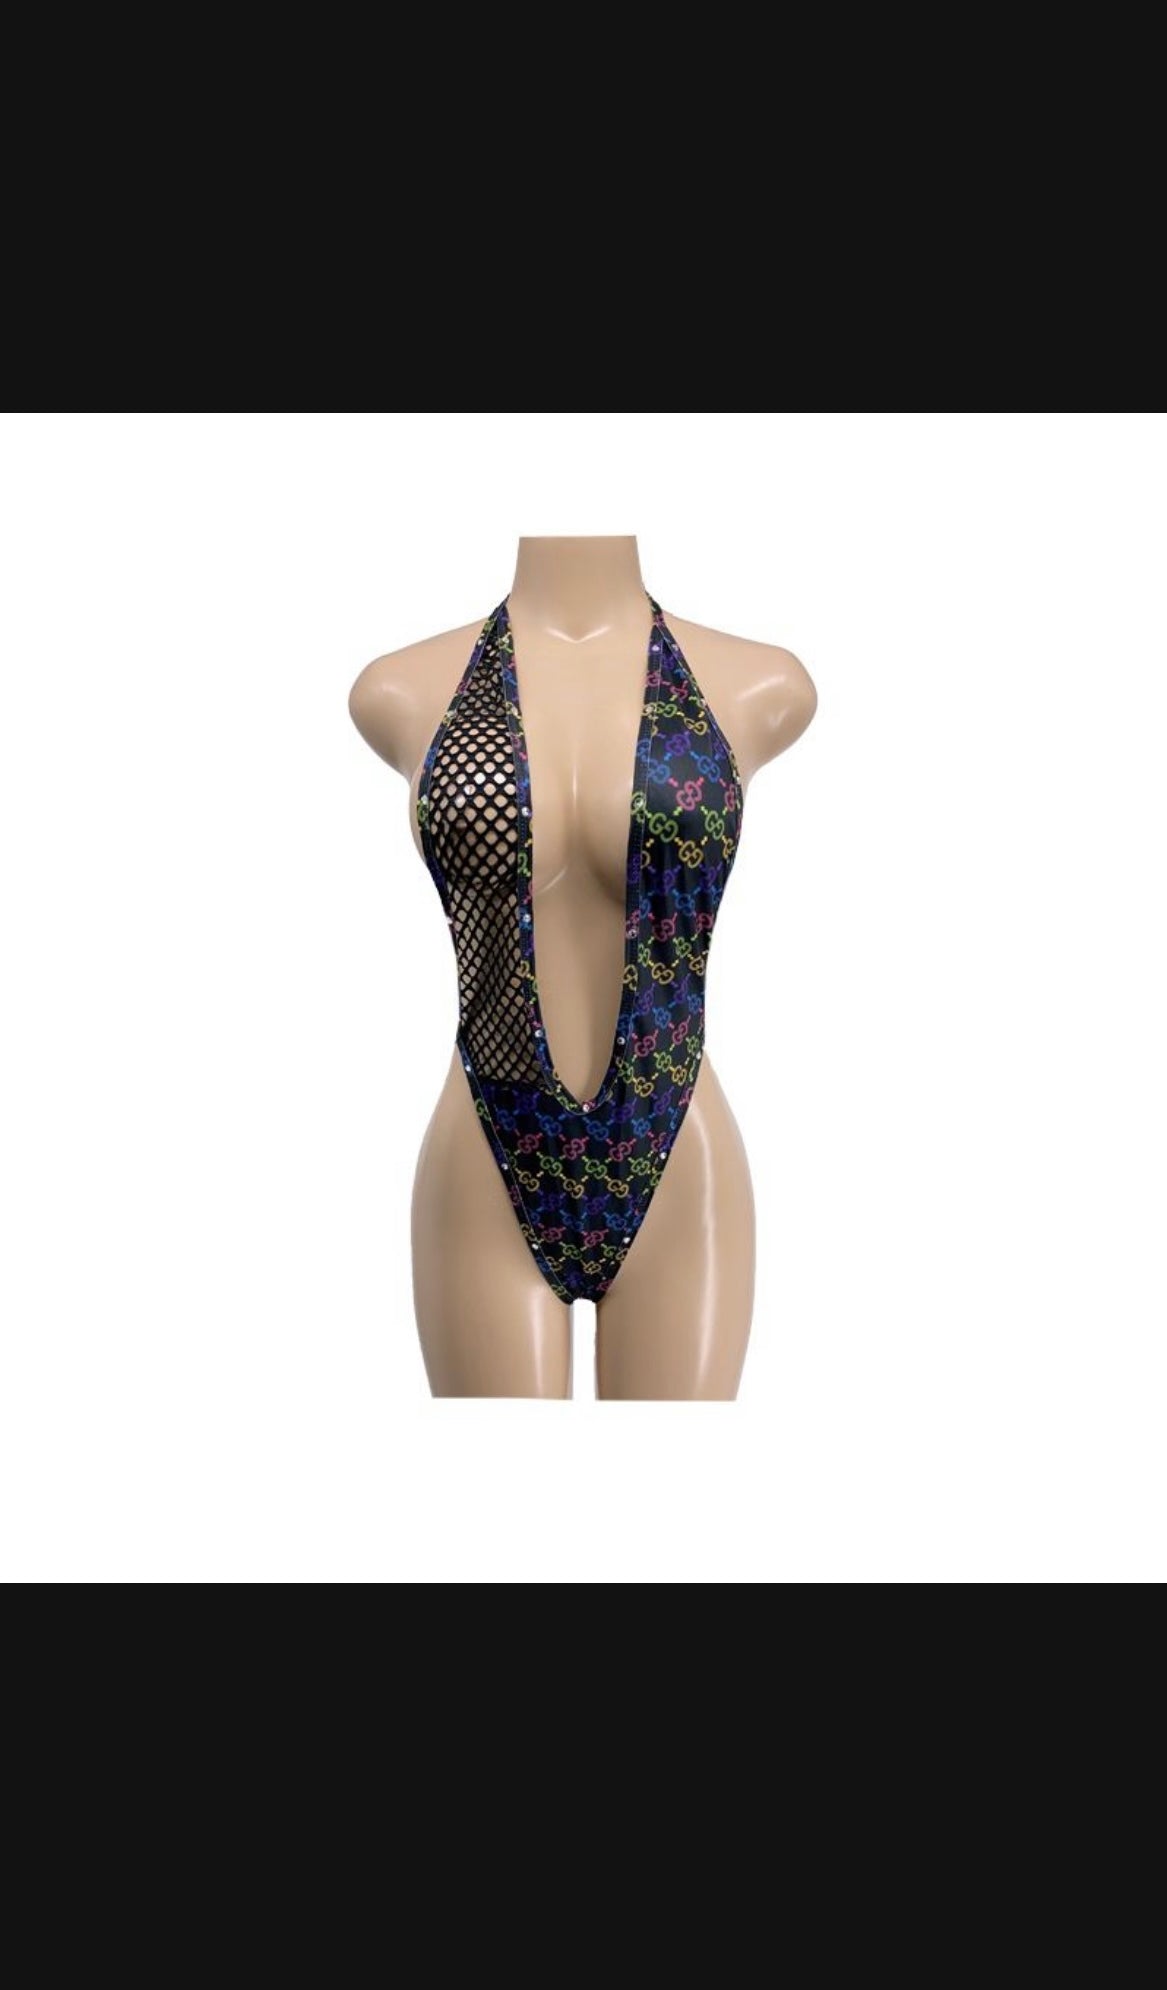 GG Multi-Color Slingshot Exotic Stripper Outfit